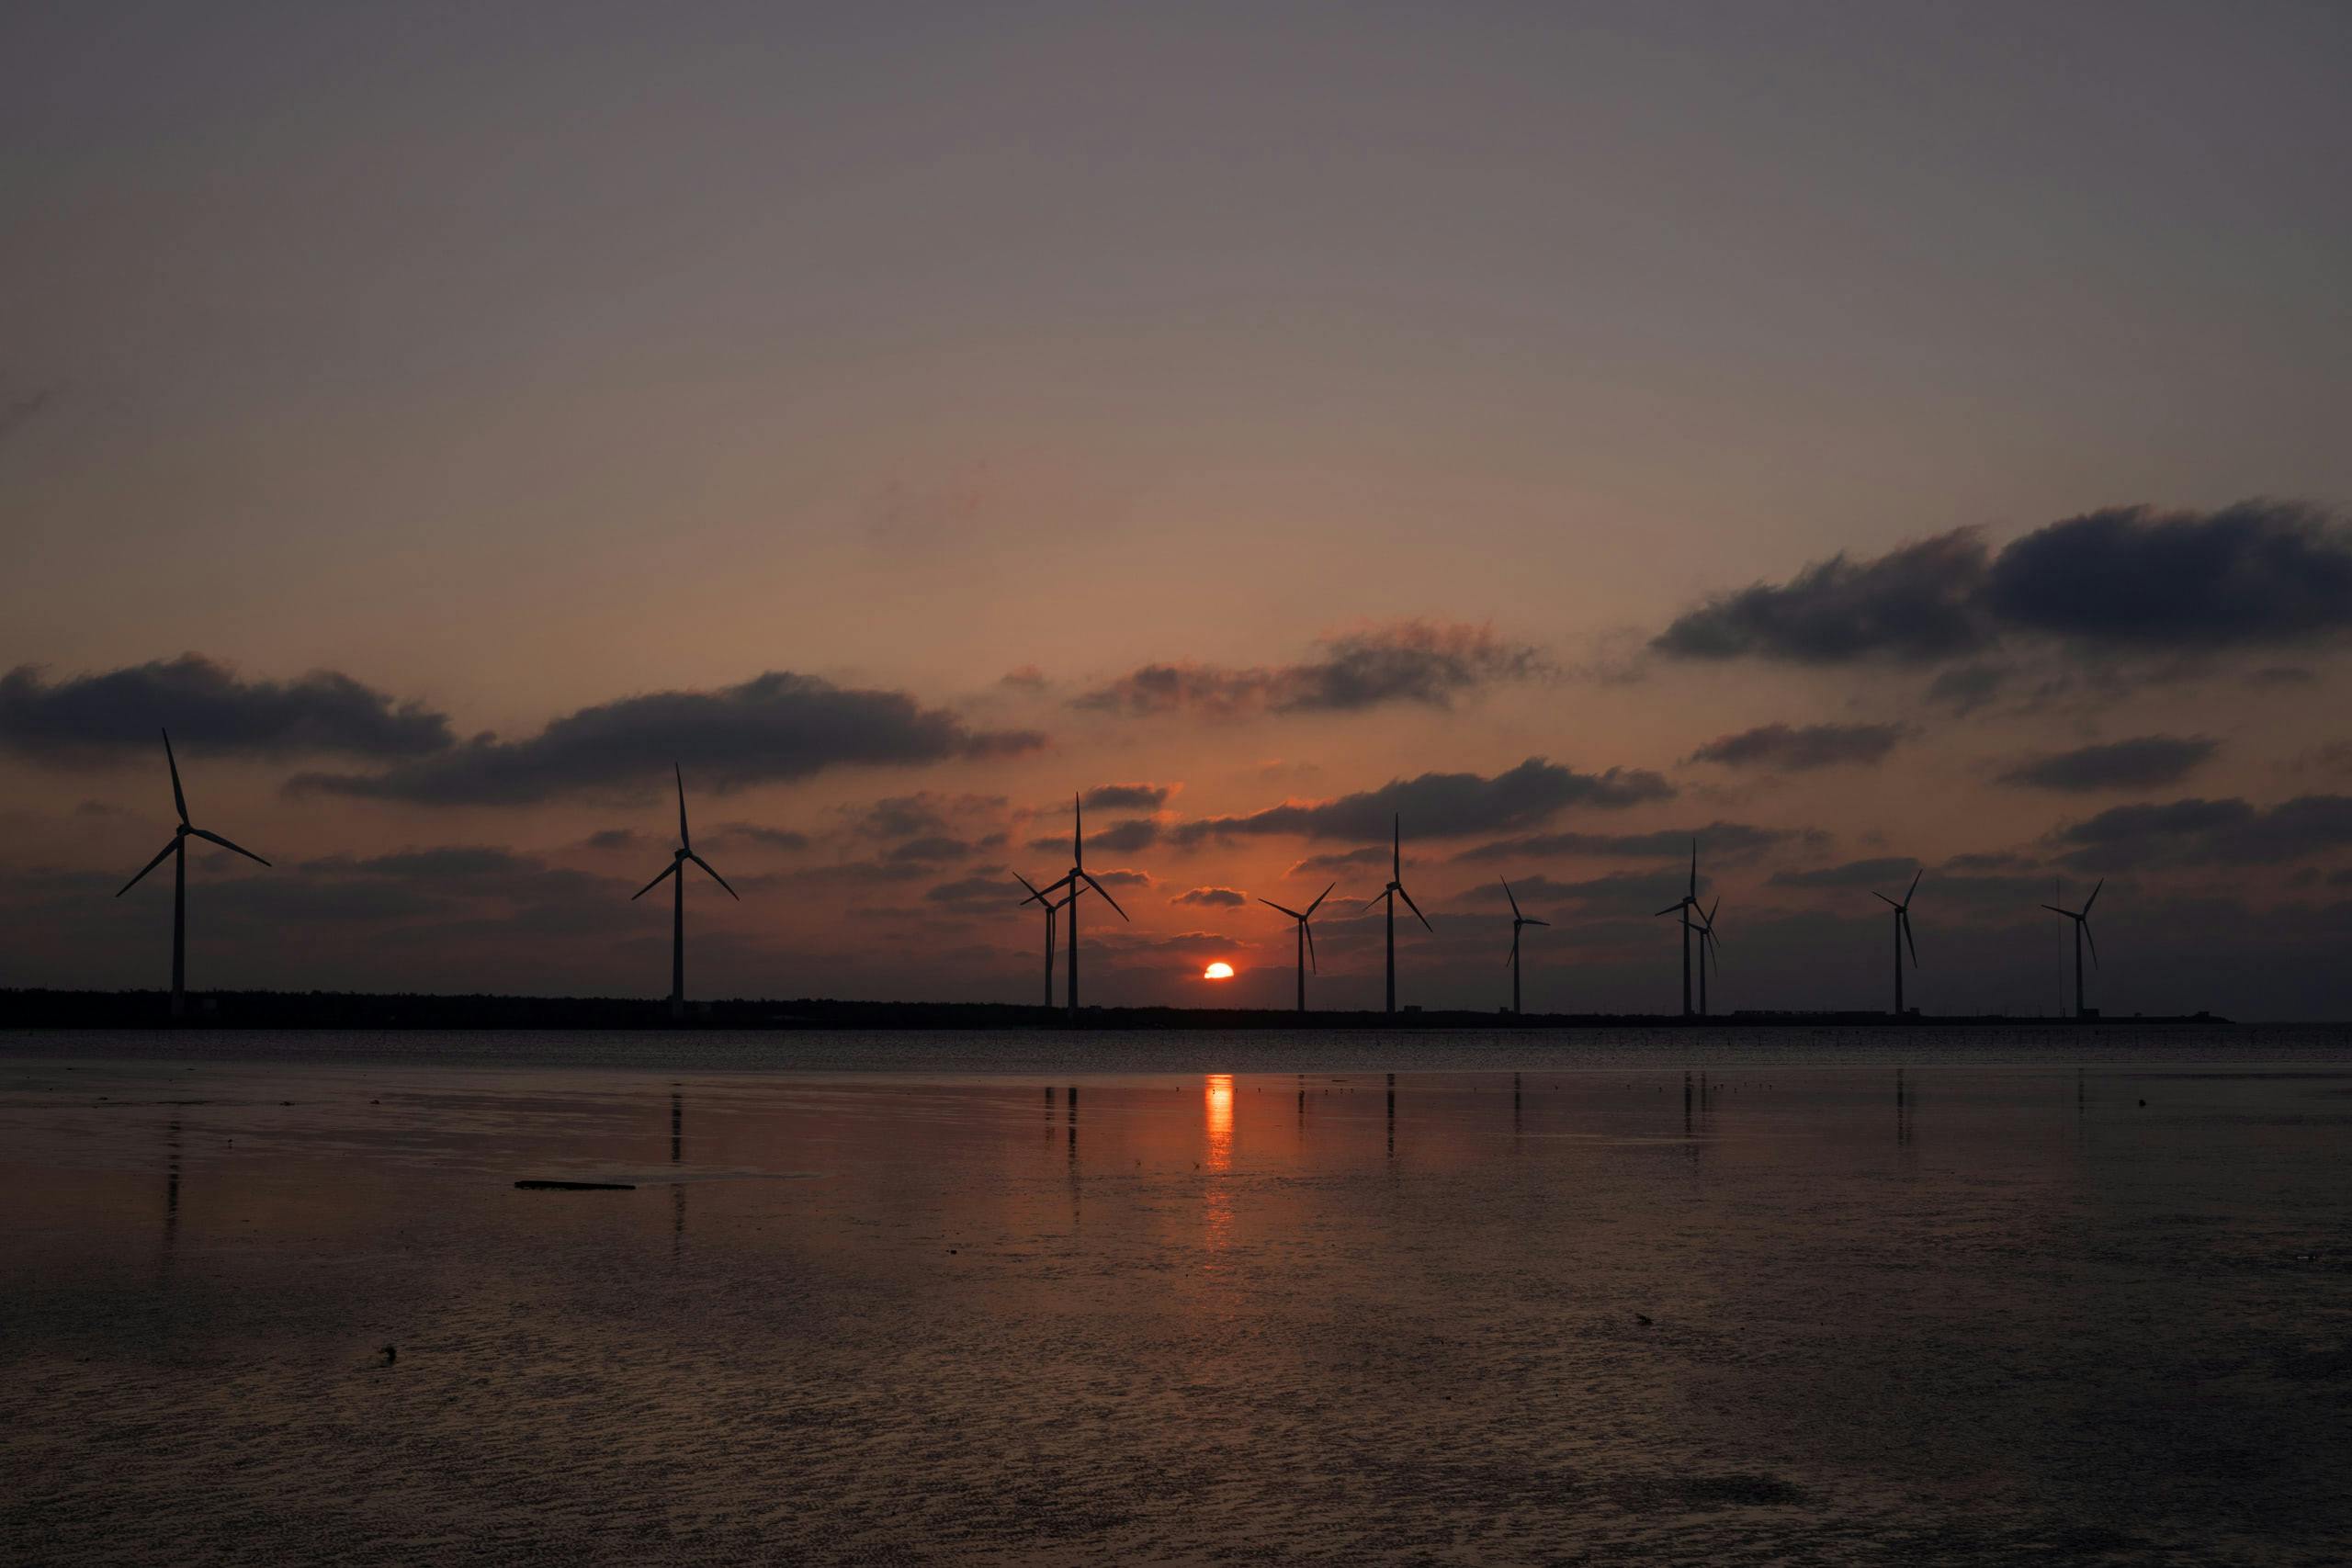 Sunset with a row of windmills at a distance